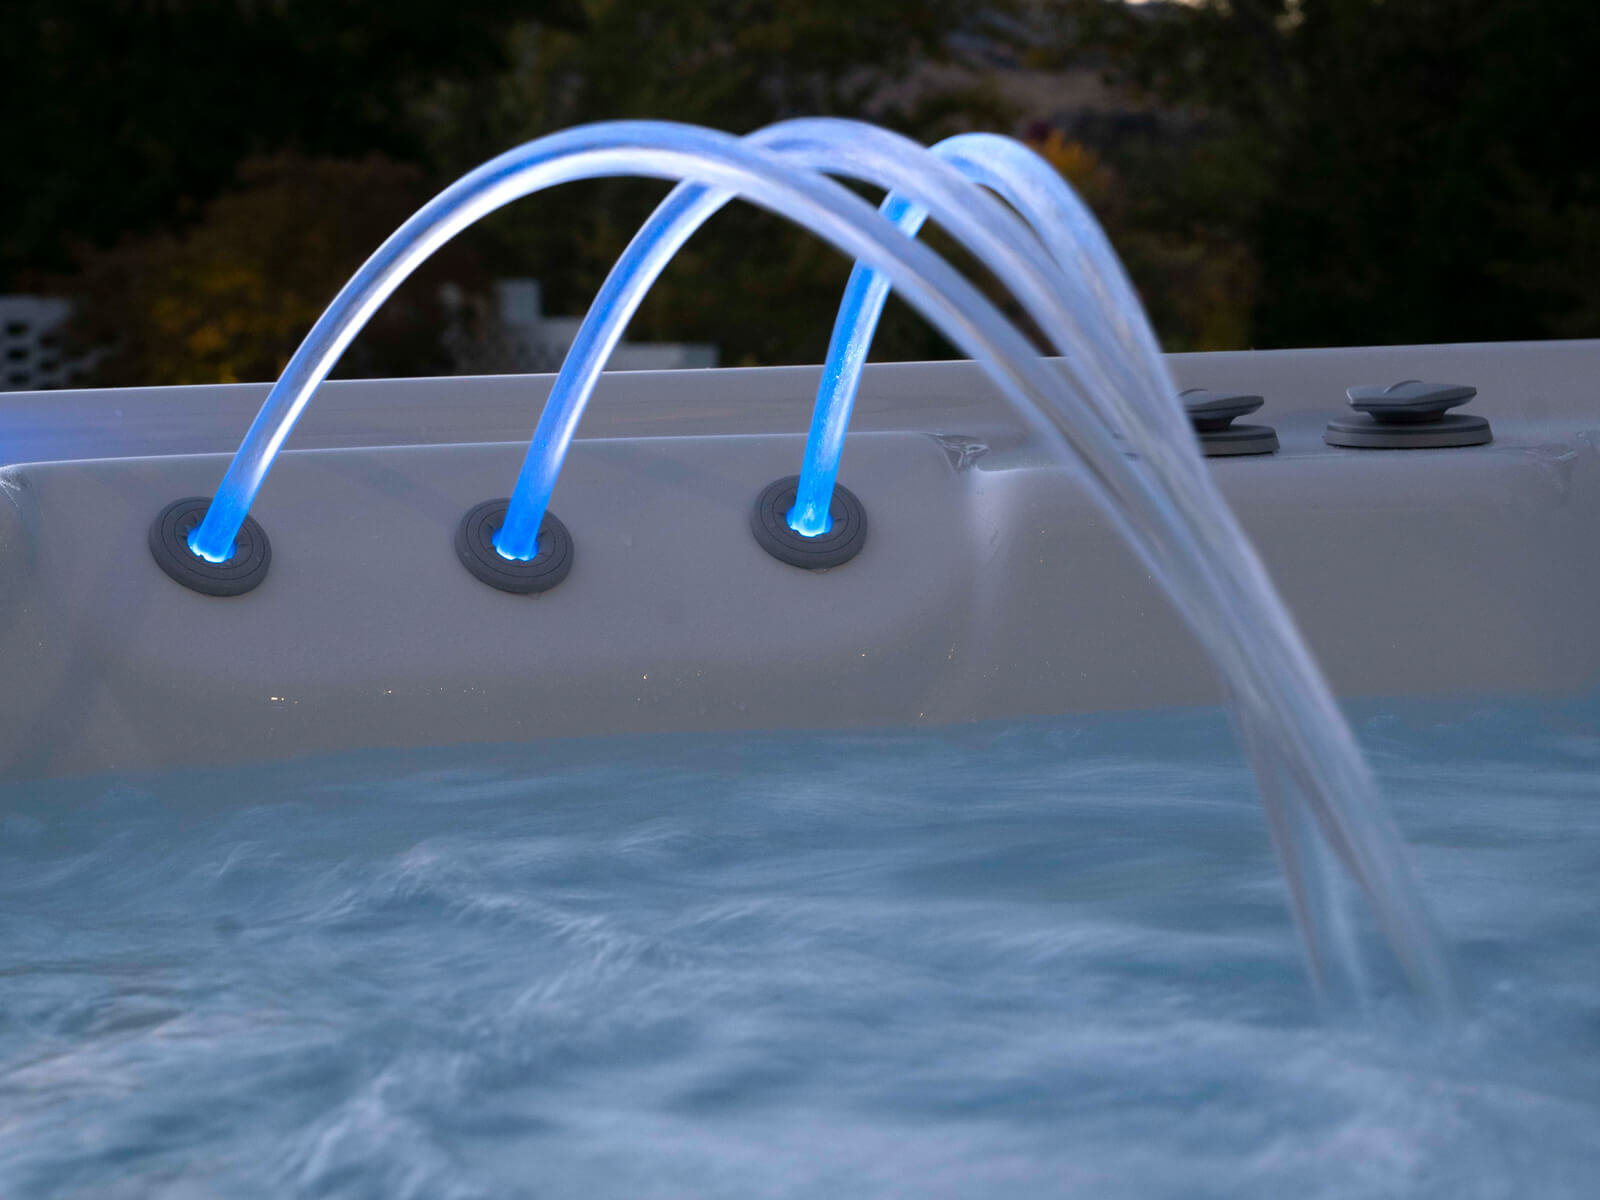 Hot Tub Maintenance: Comprehensive Guide To Keeping Your Hot Tub In Tip-top Shape